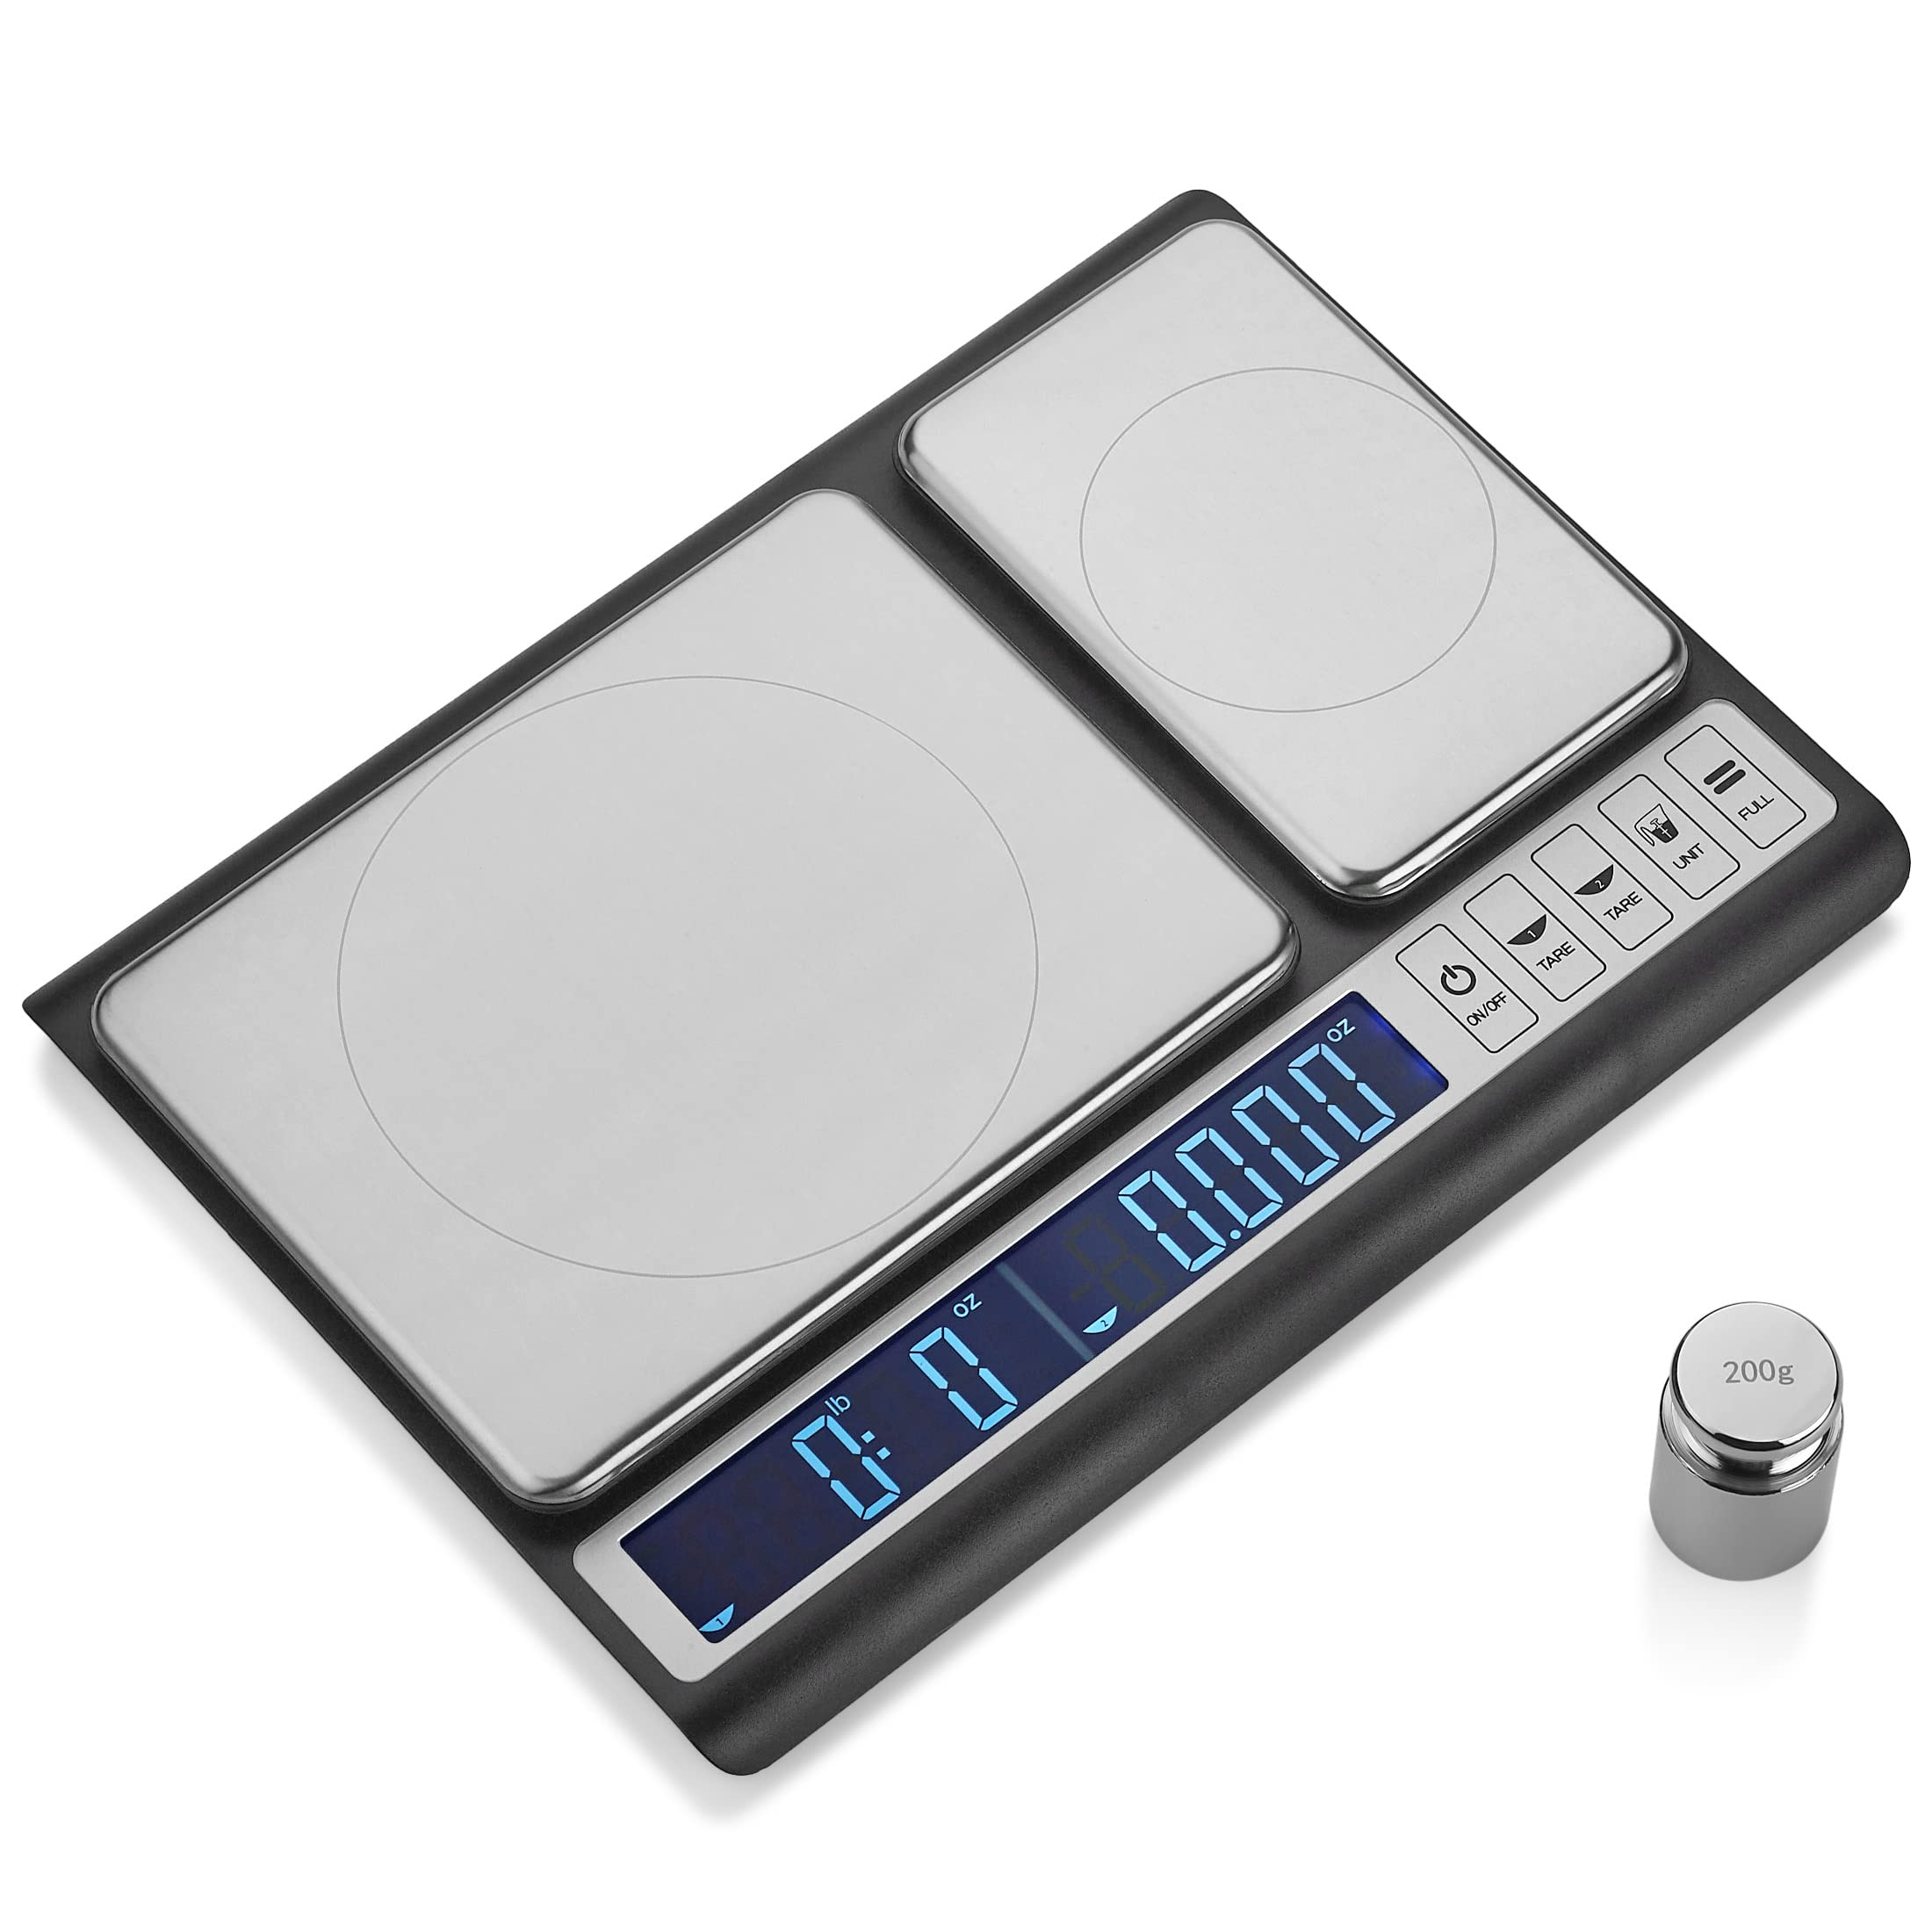 Smart Weigh Culinary Kitchen Scale 10 kilograms x 0.01 Grams, Digital Food Scale with Dual Weight Platforms for Baking, Cooking, Food, and Ingredients  - Like New